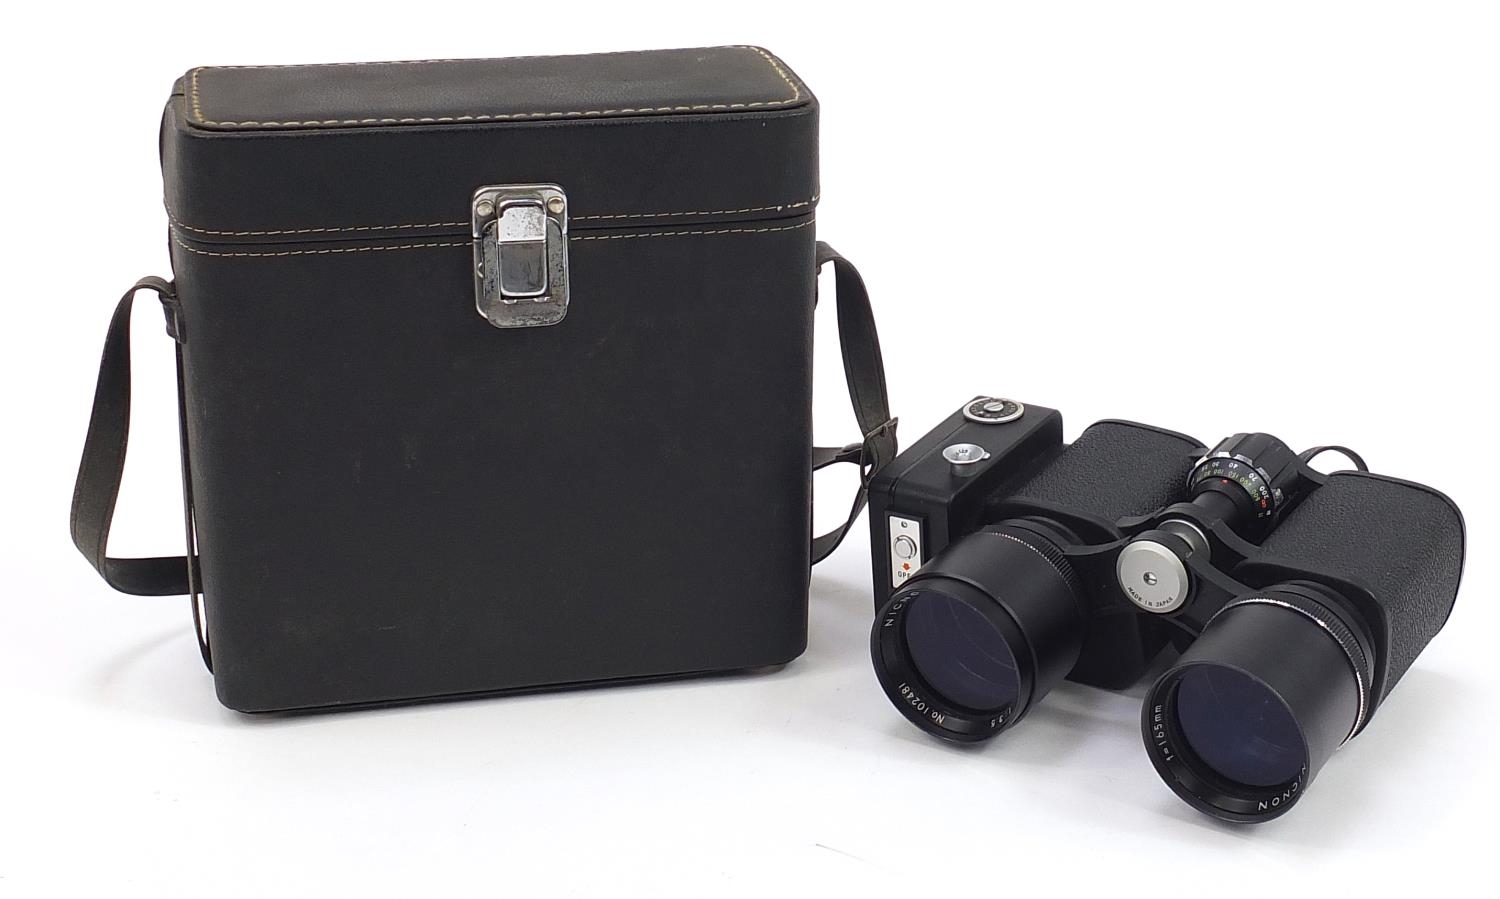 Nicnon TF7X50 combination binoculars and camera with protective case